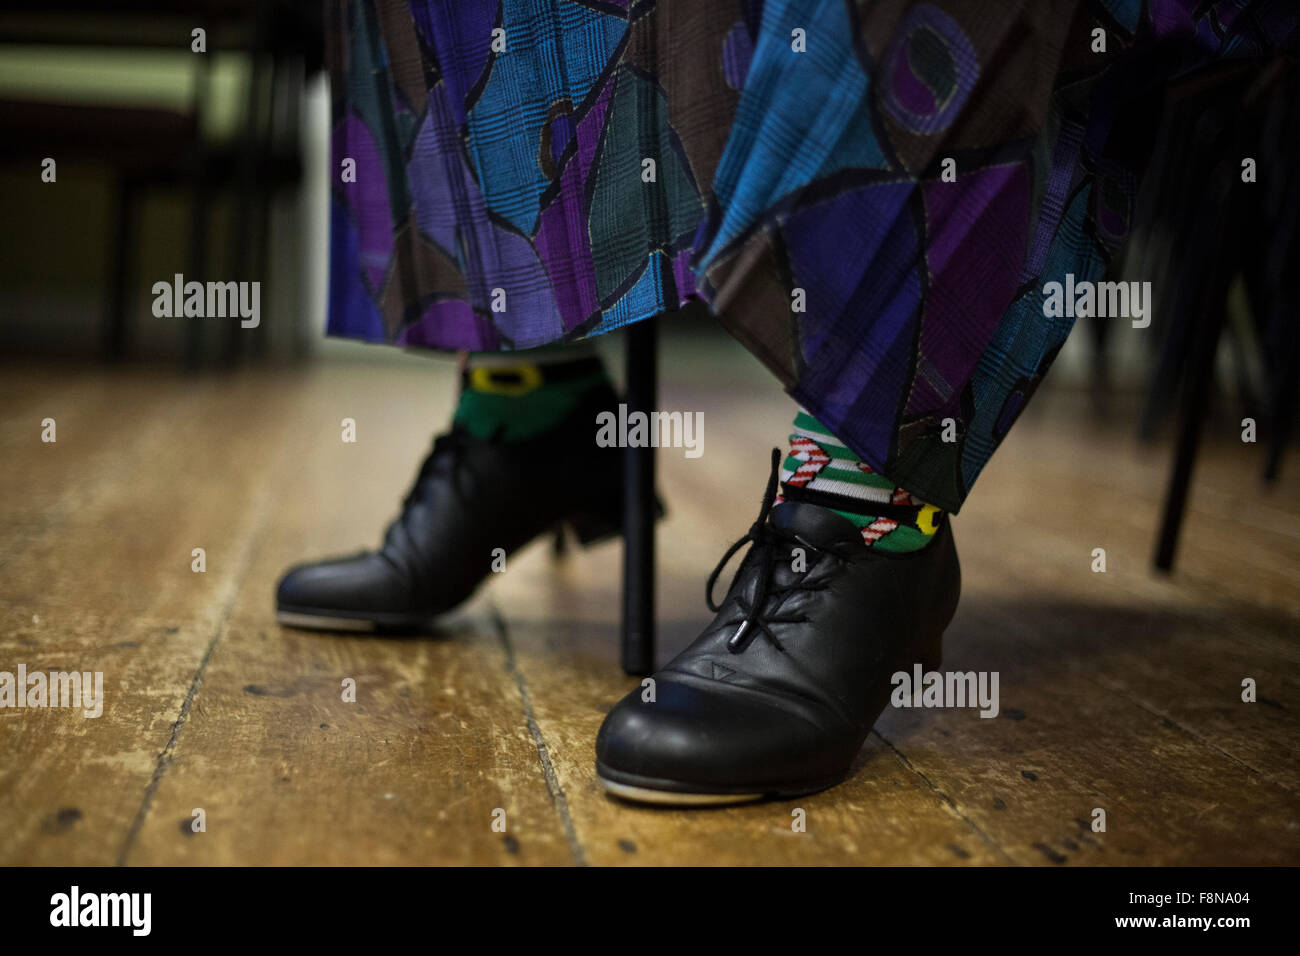 A close up image of a lady in a skirt wearing tap shoes. Stock Photo